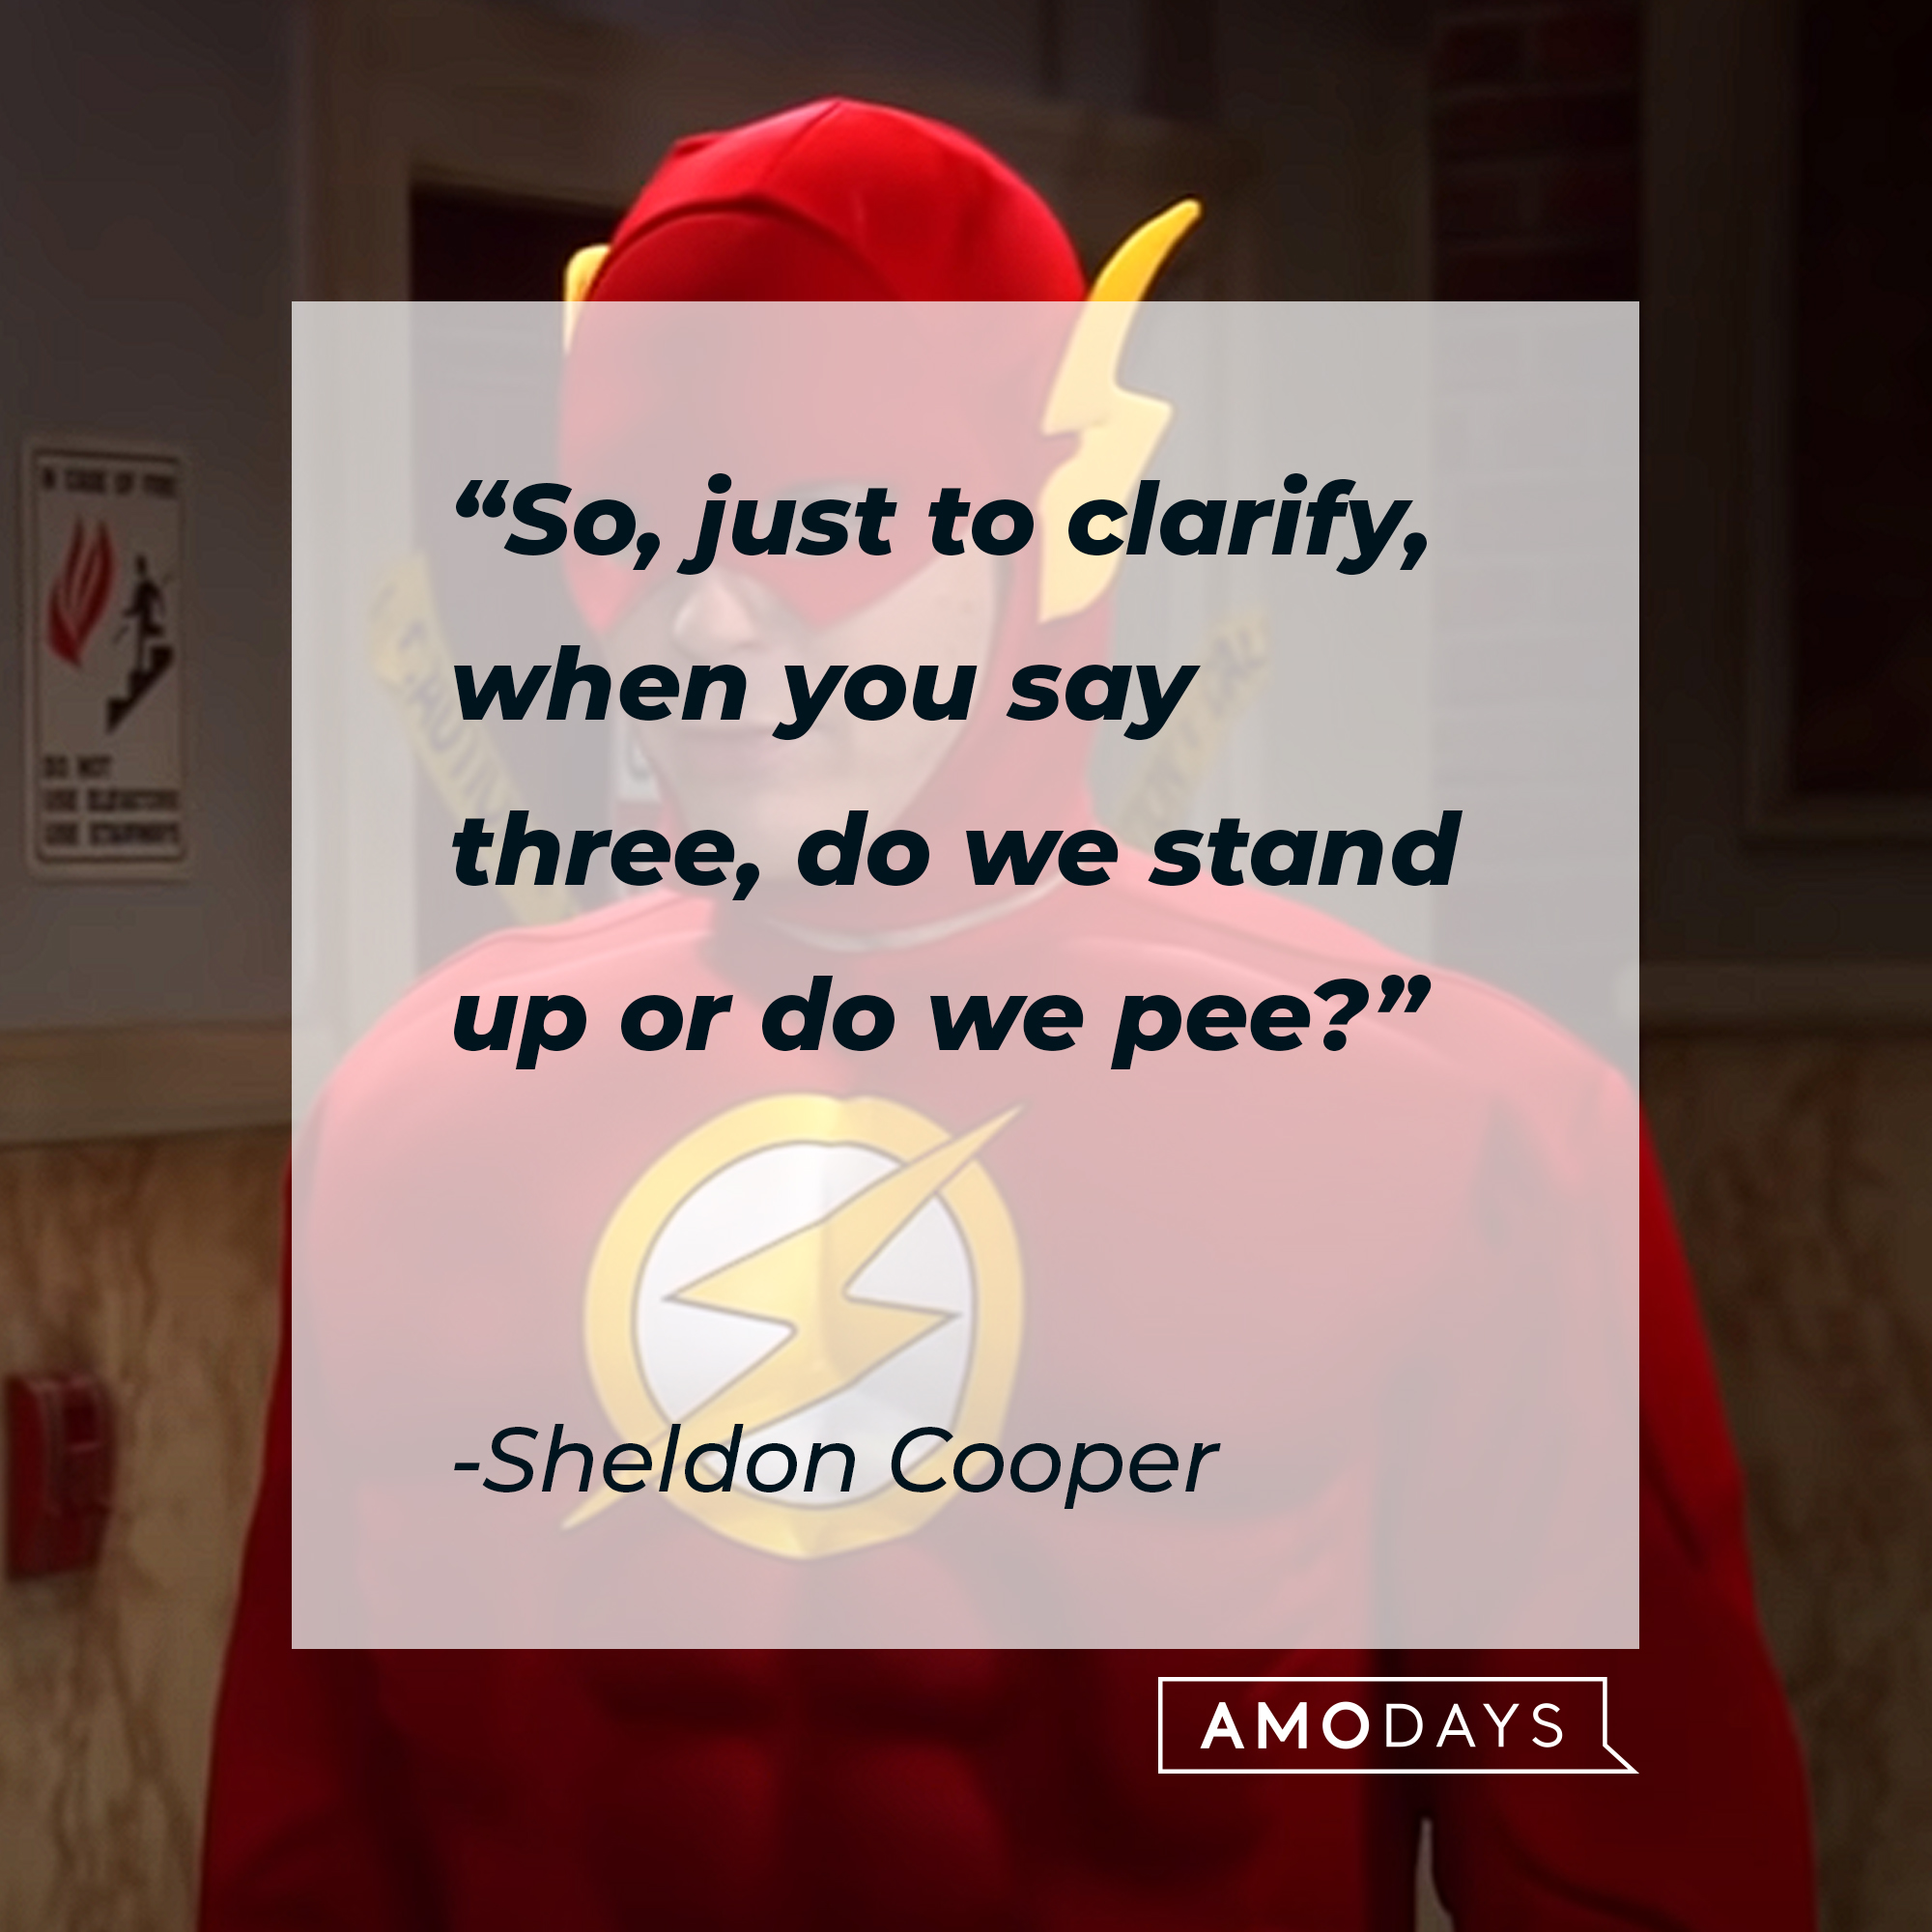 Sheldon Cooper's quote: "So, just to clarify, when you say three, do we stand up or do we pee?" | Source: youtube.com/warnerbrostv